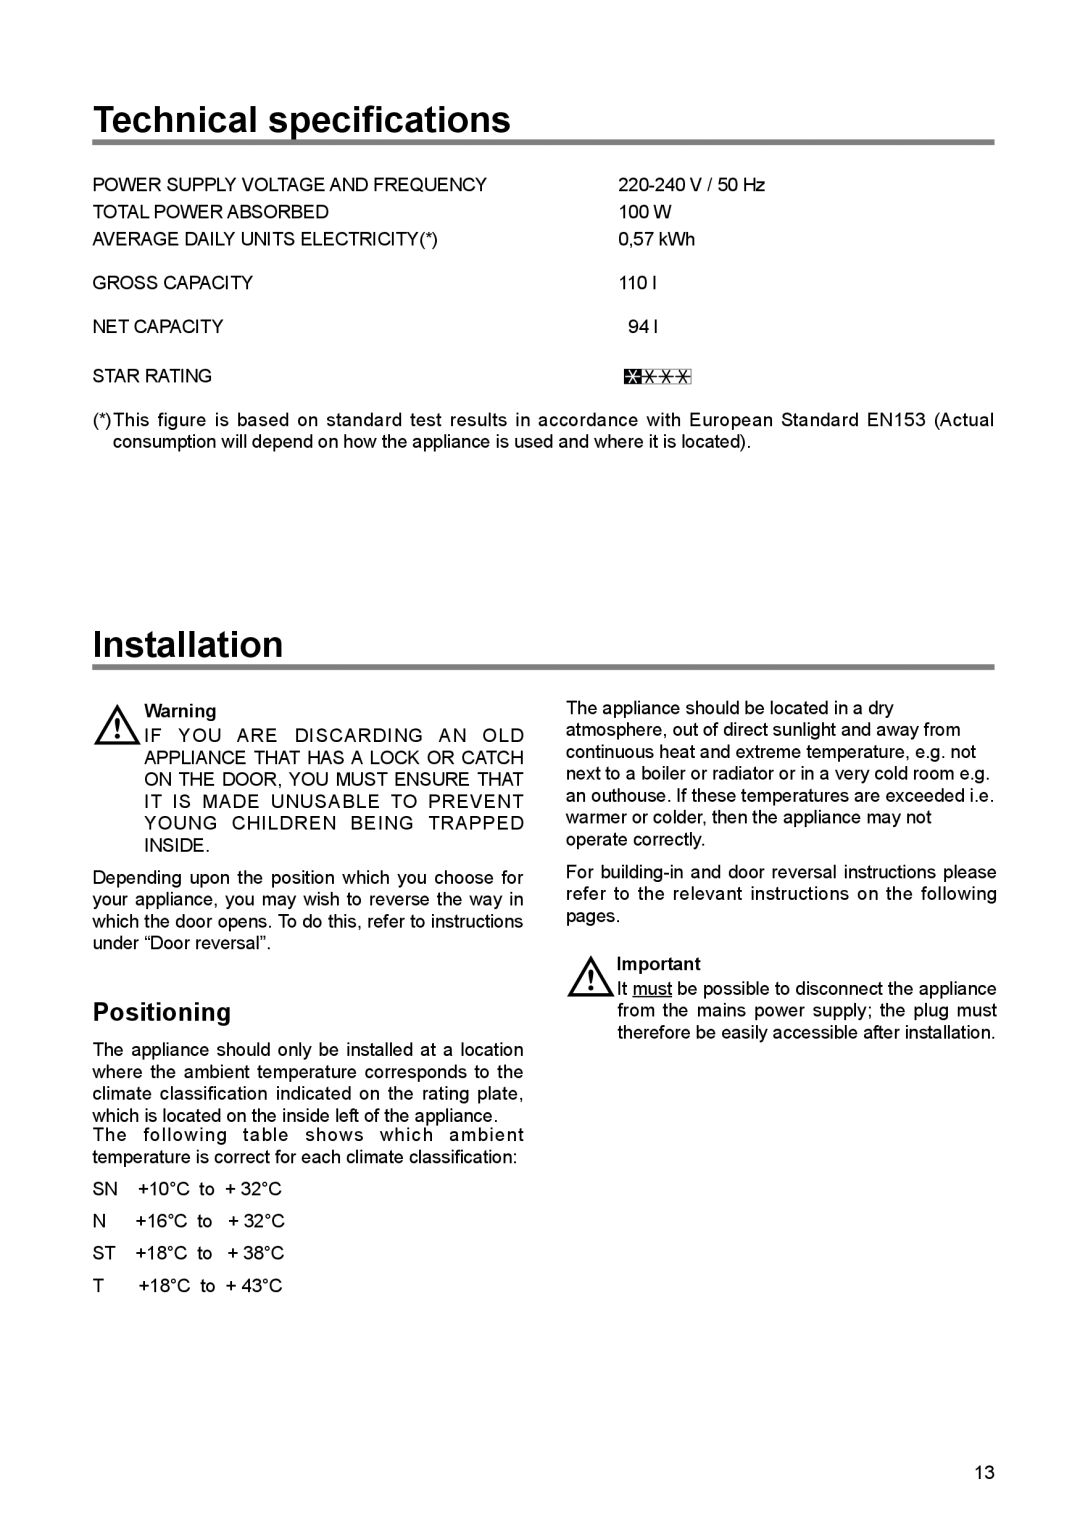 Zanussi ZI 9121 FA manual Technical specifications, Installation, Positioning 